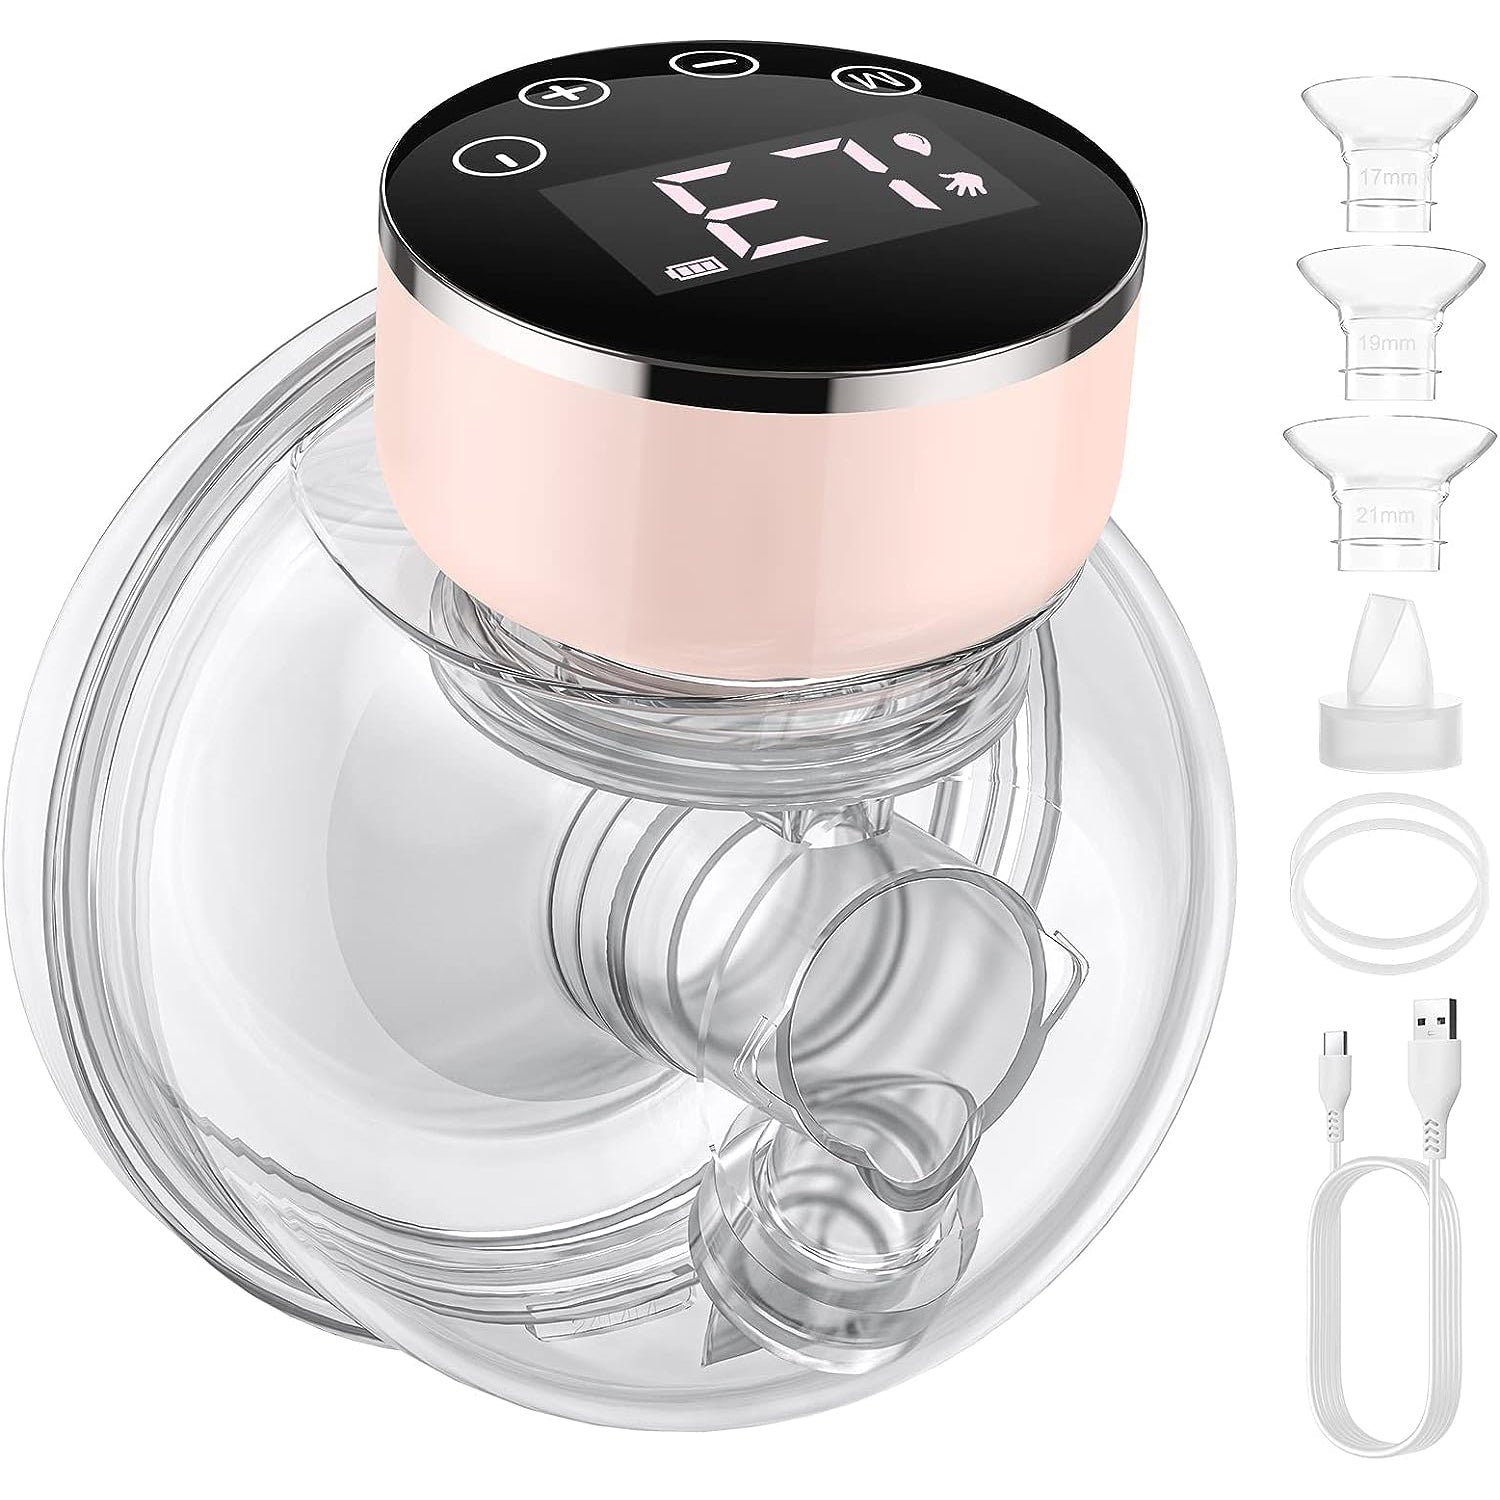 eSynic Electric Breast Pump Portable 3 Modes and 9 Levels Painless